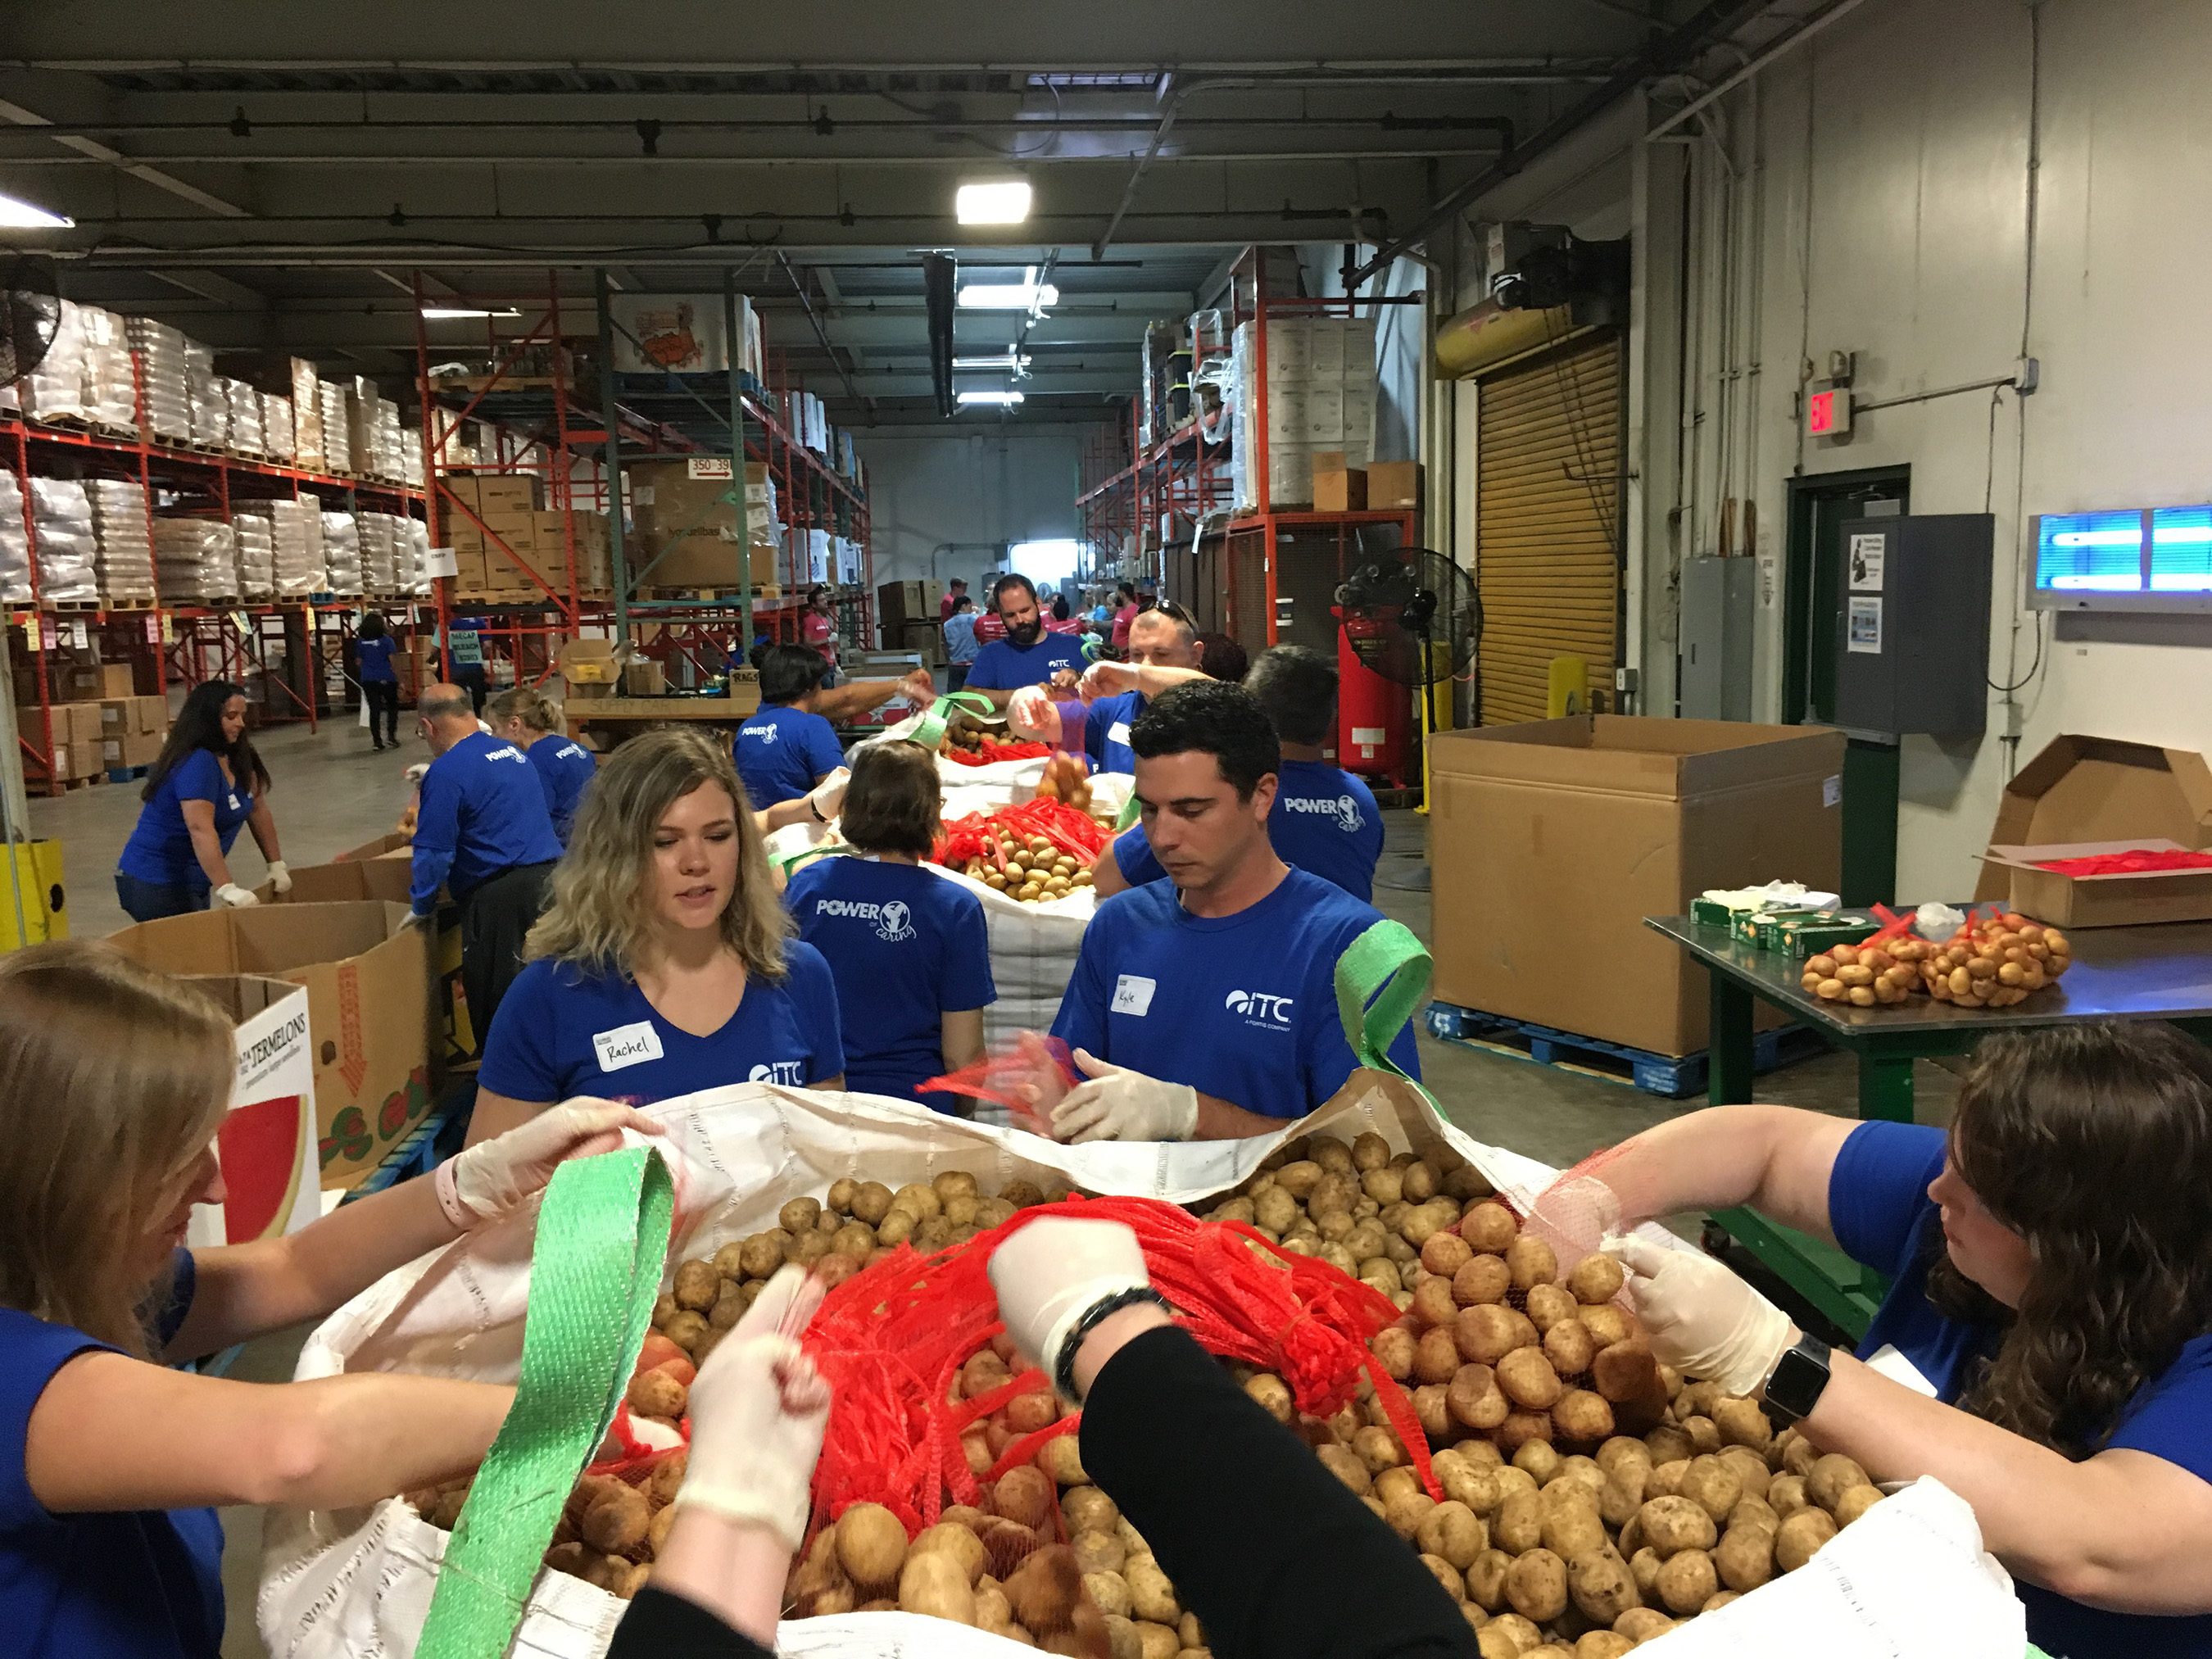 ITC held its inaugural Power of Caring Volunteer Day at Gleaners Community Food Bank in Detroit, giving employees the opportunity to come together in support of a common charitable cause.